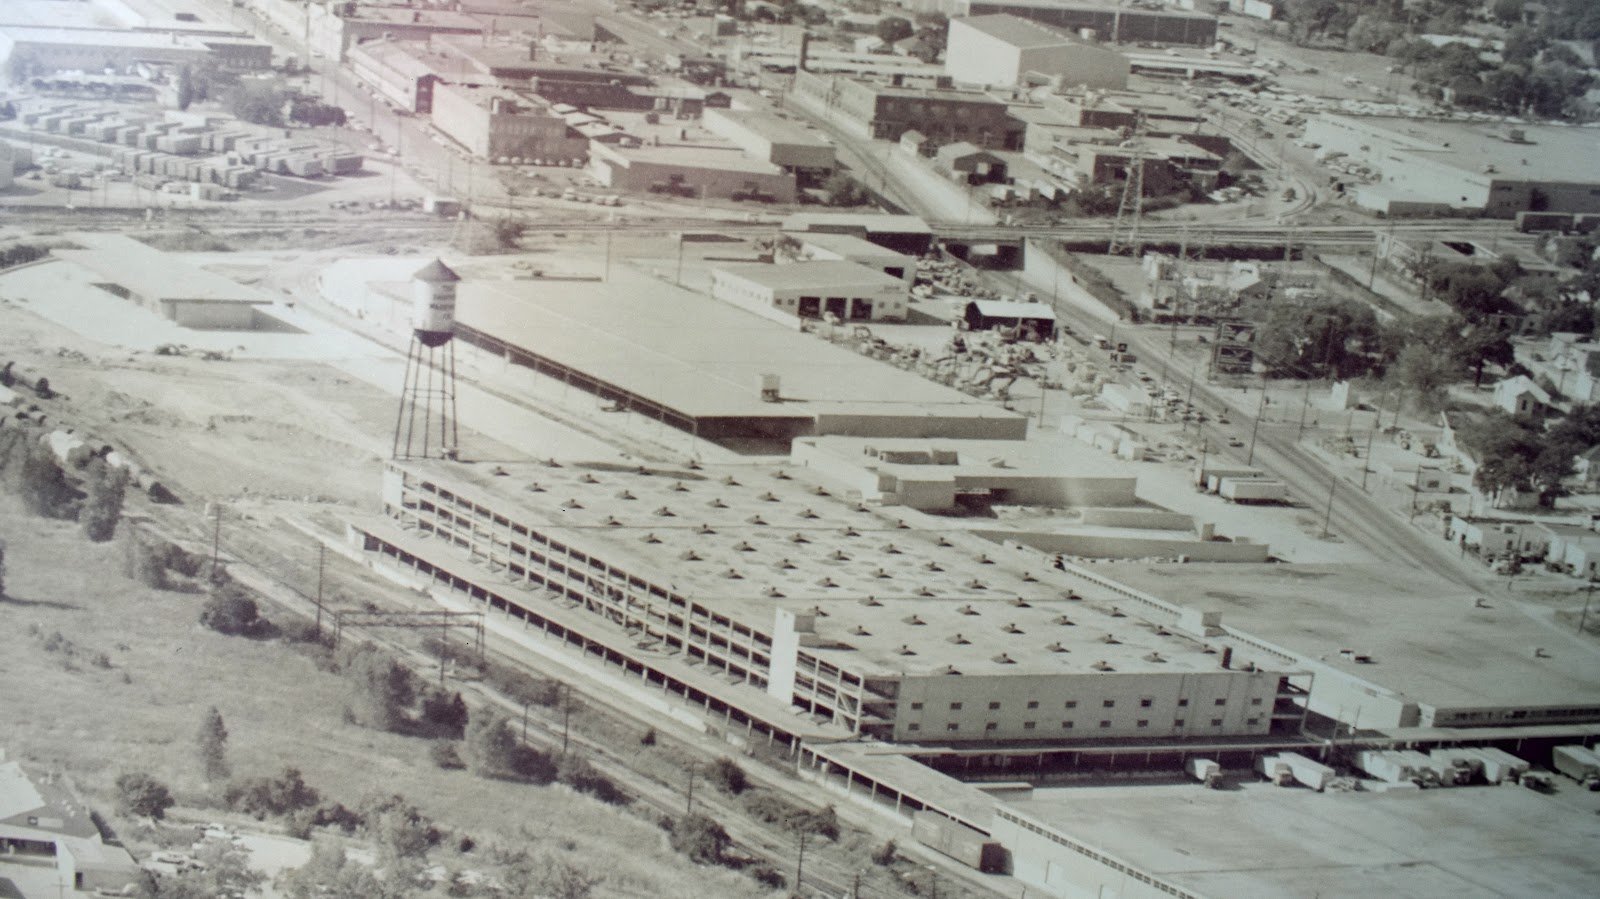 Shippers Warehouse in Dallas 1970s